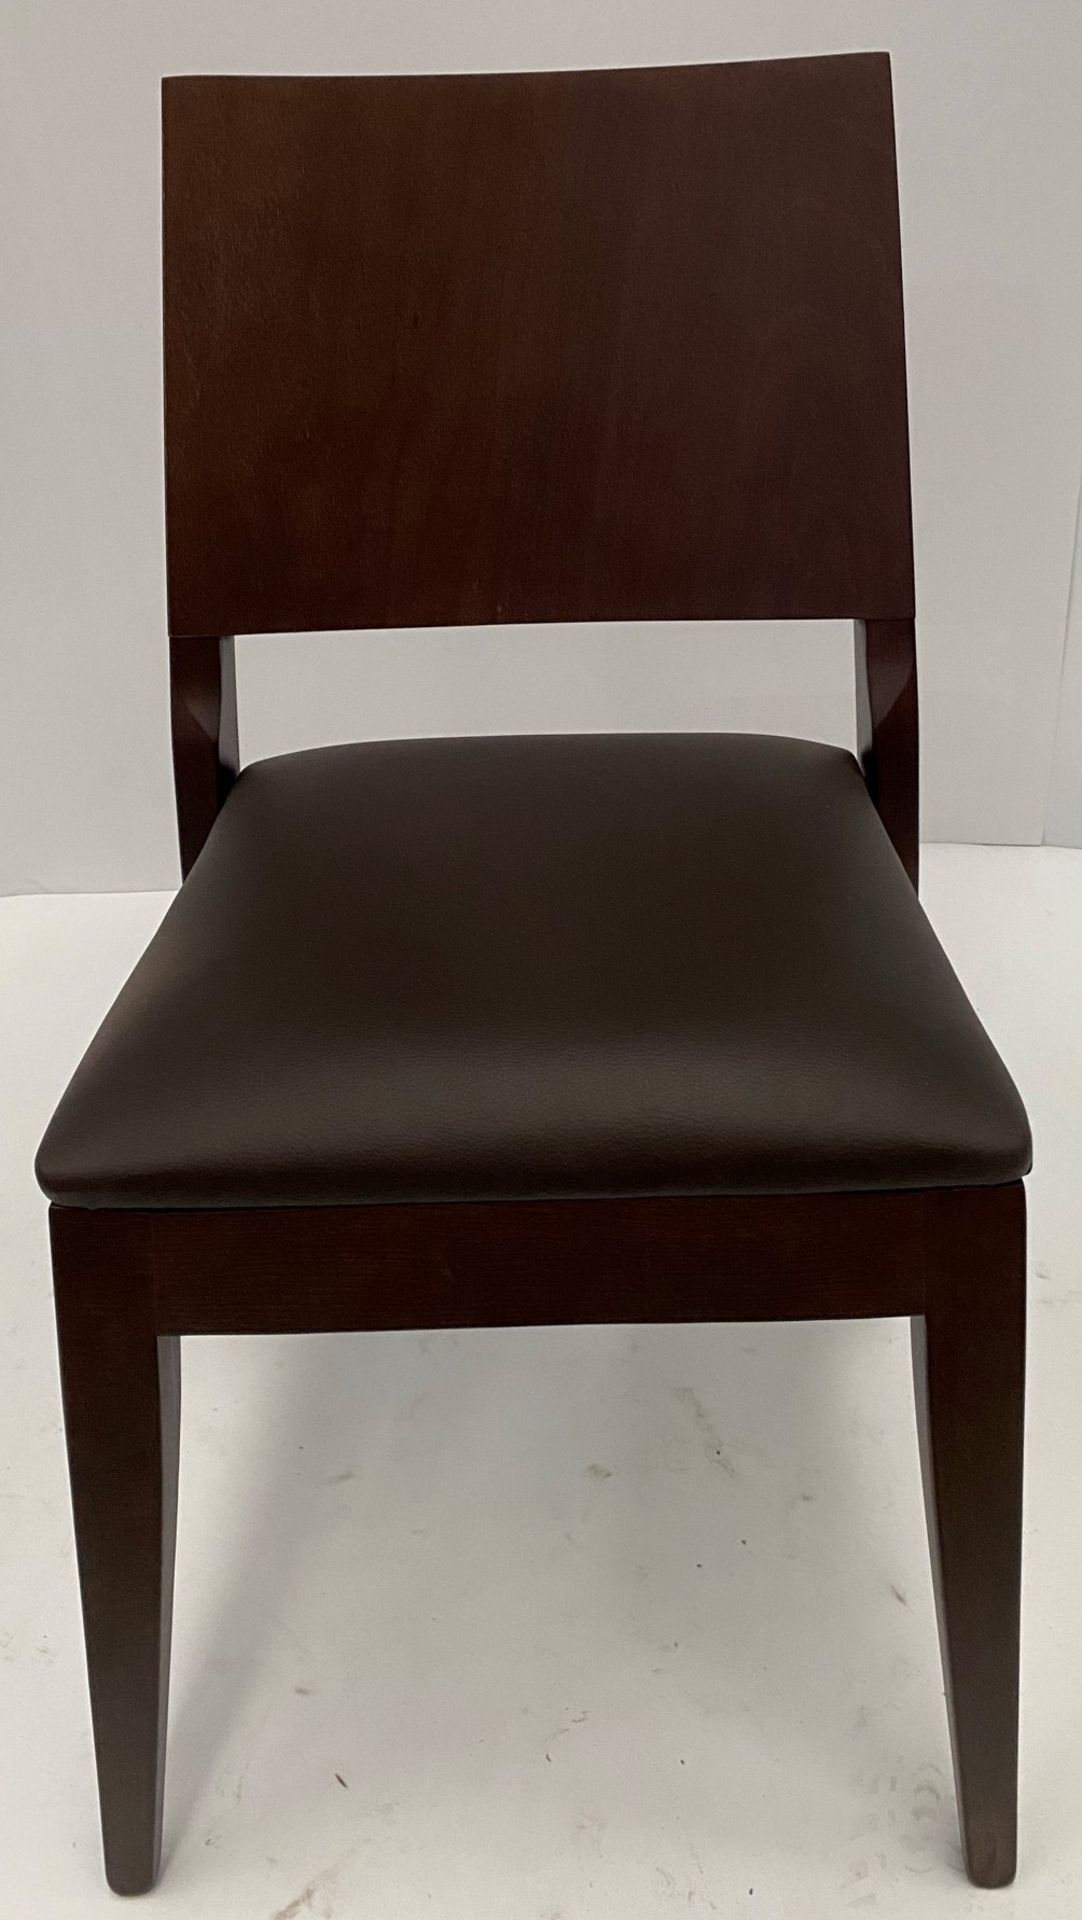 A Reuben Vena BR-5 Dark Brown side/dining chair with upholstered seat and walnut coloured frame